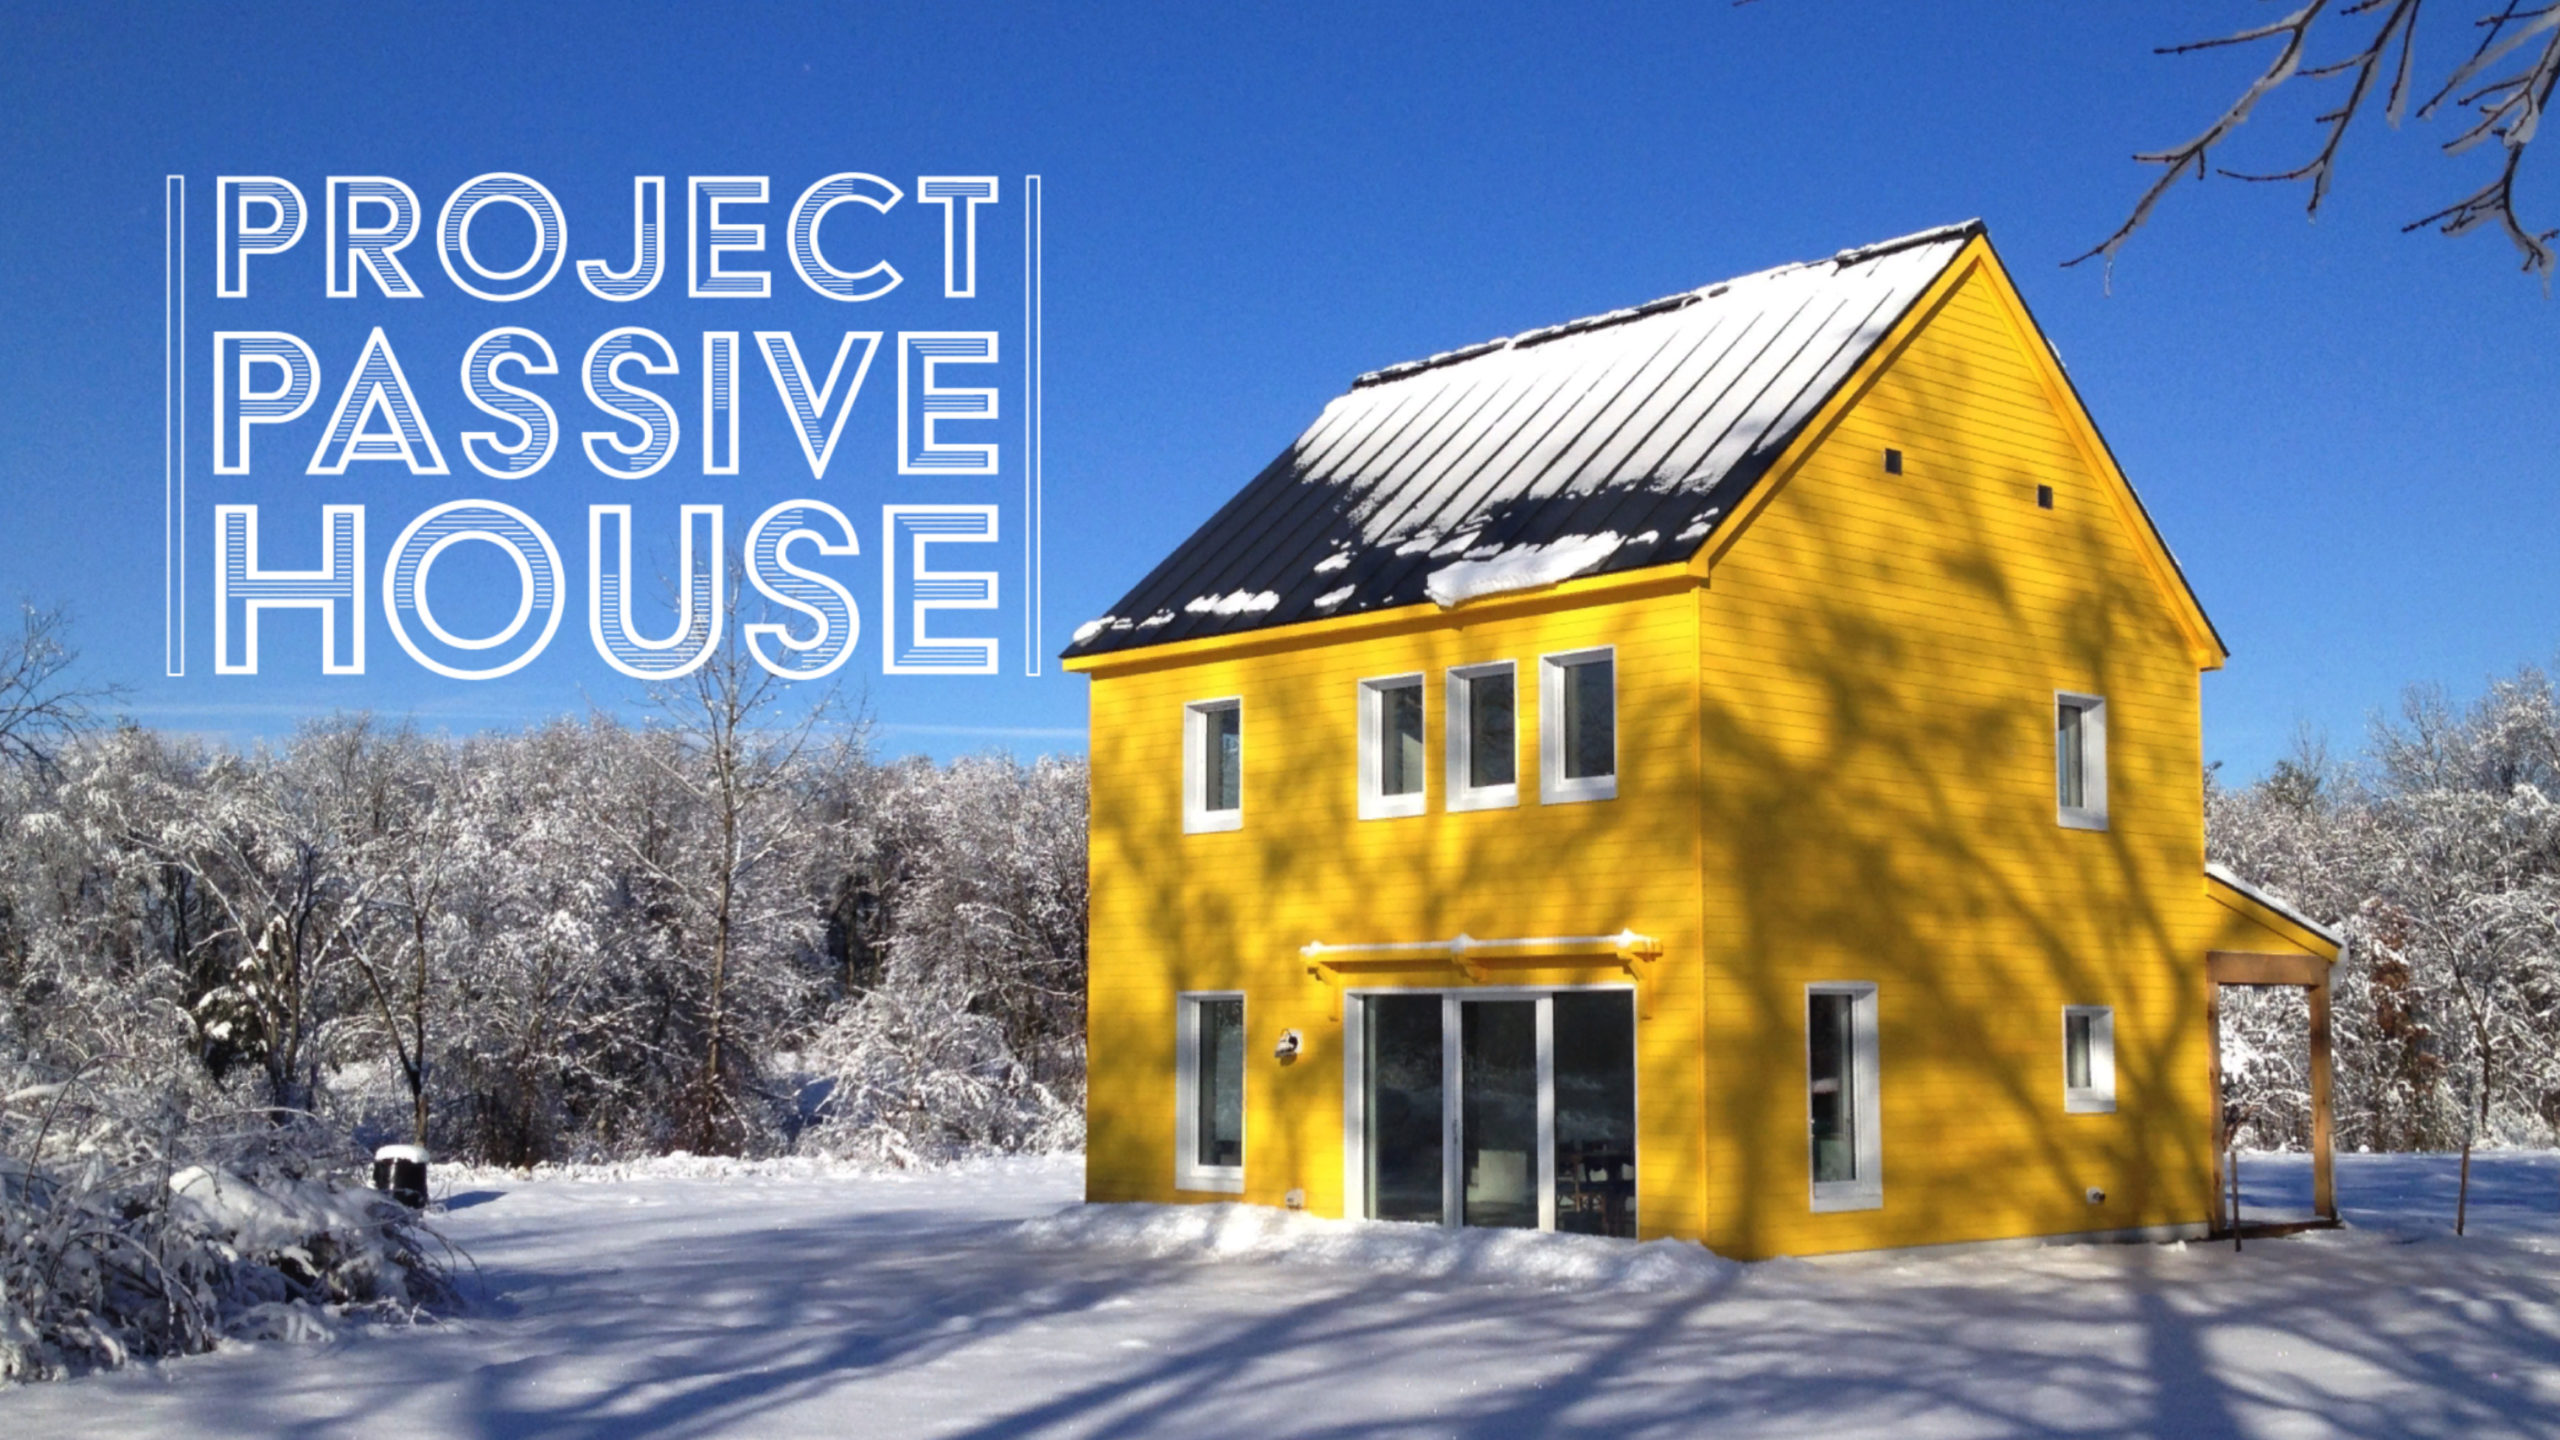 Our House- Passive House